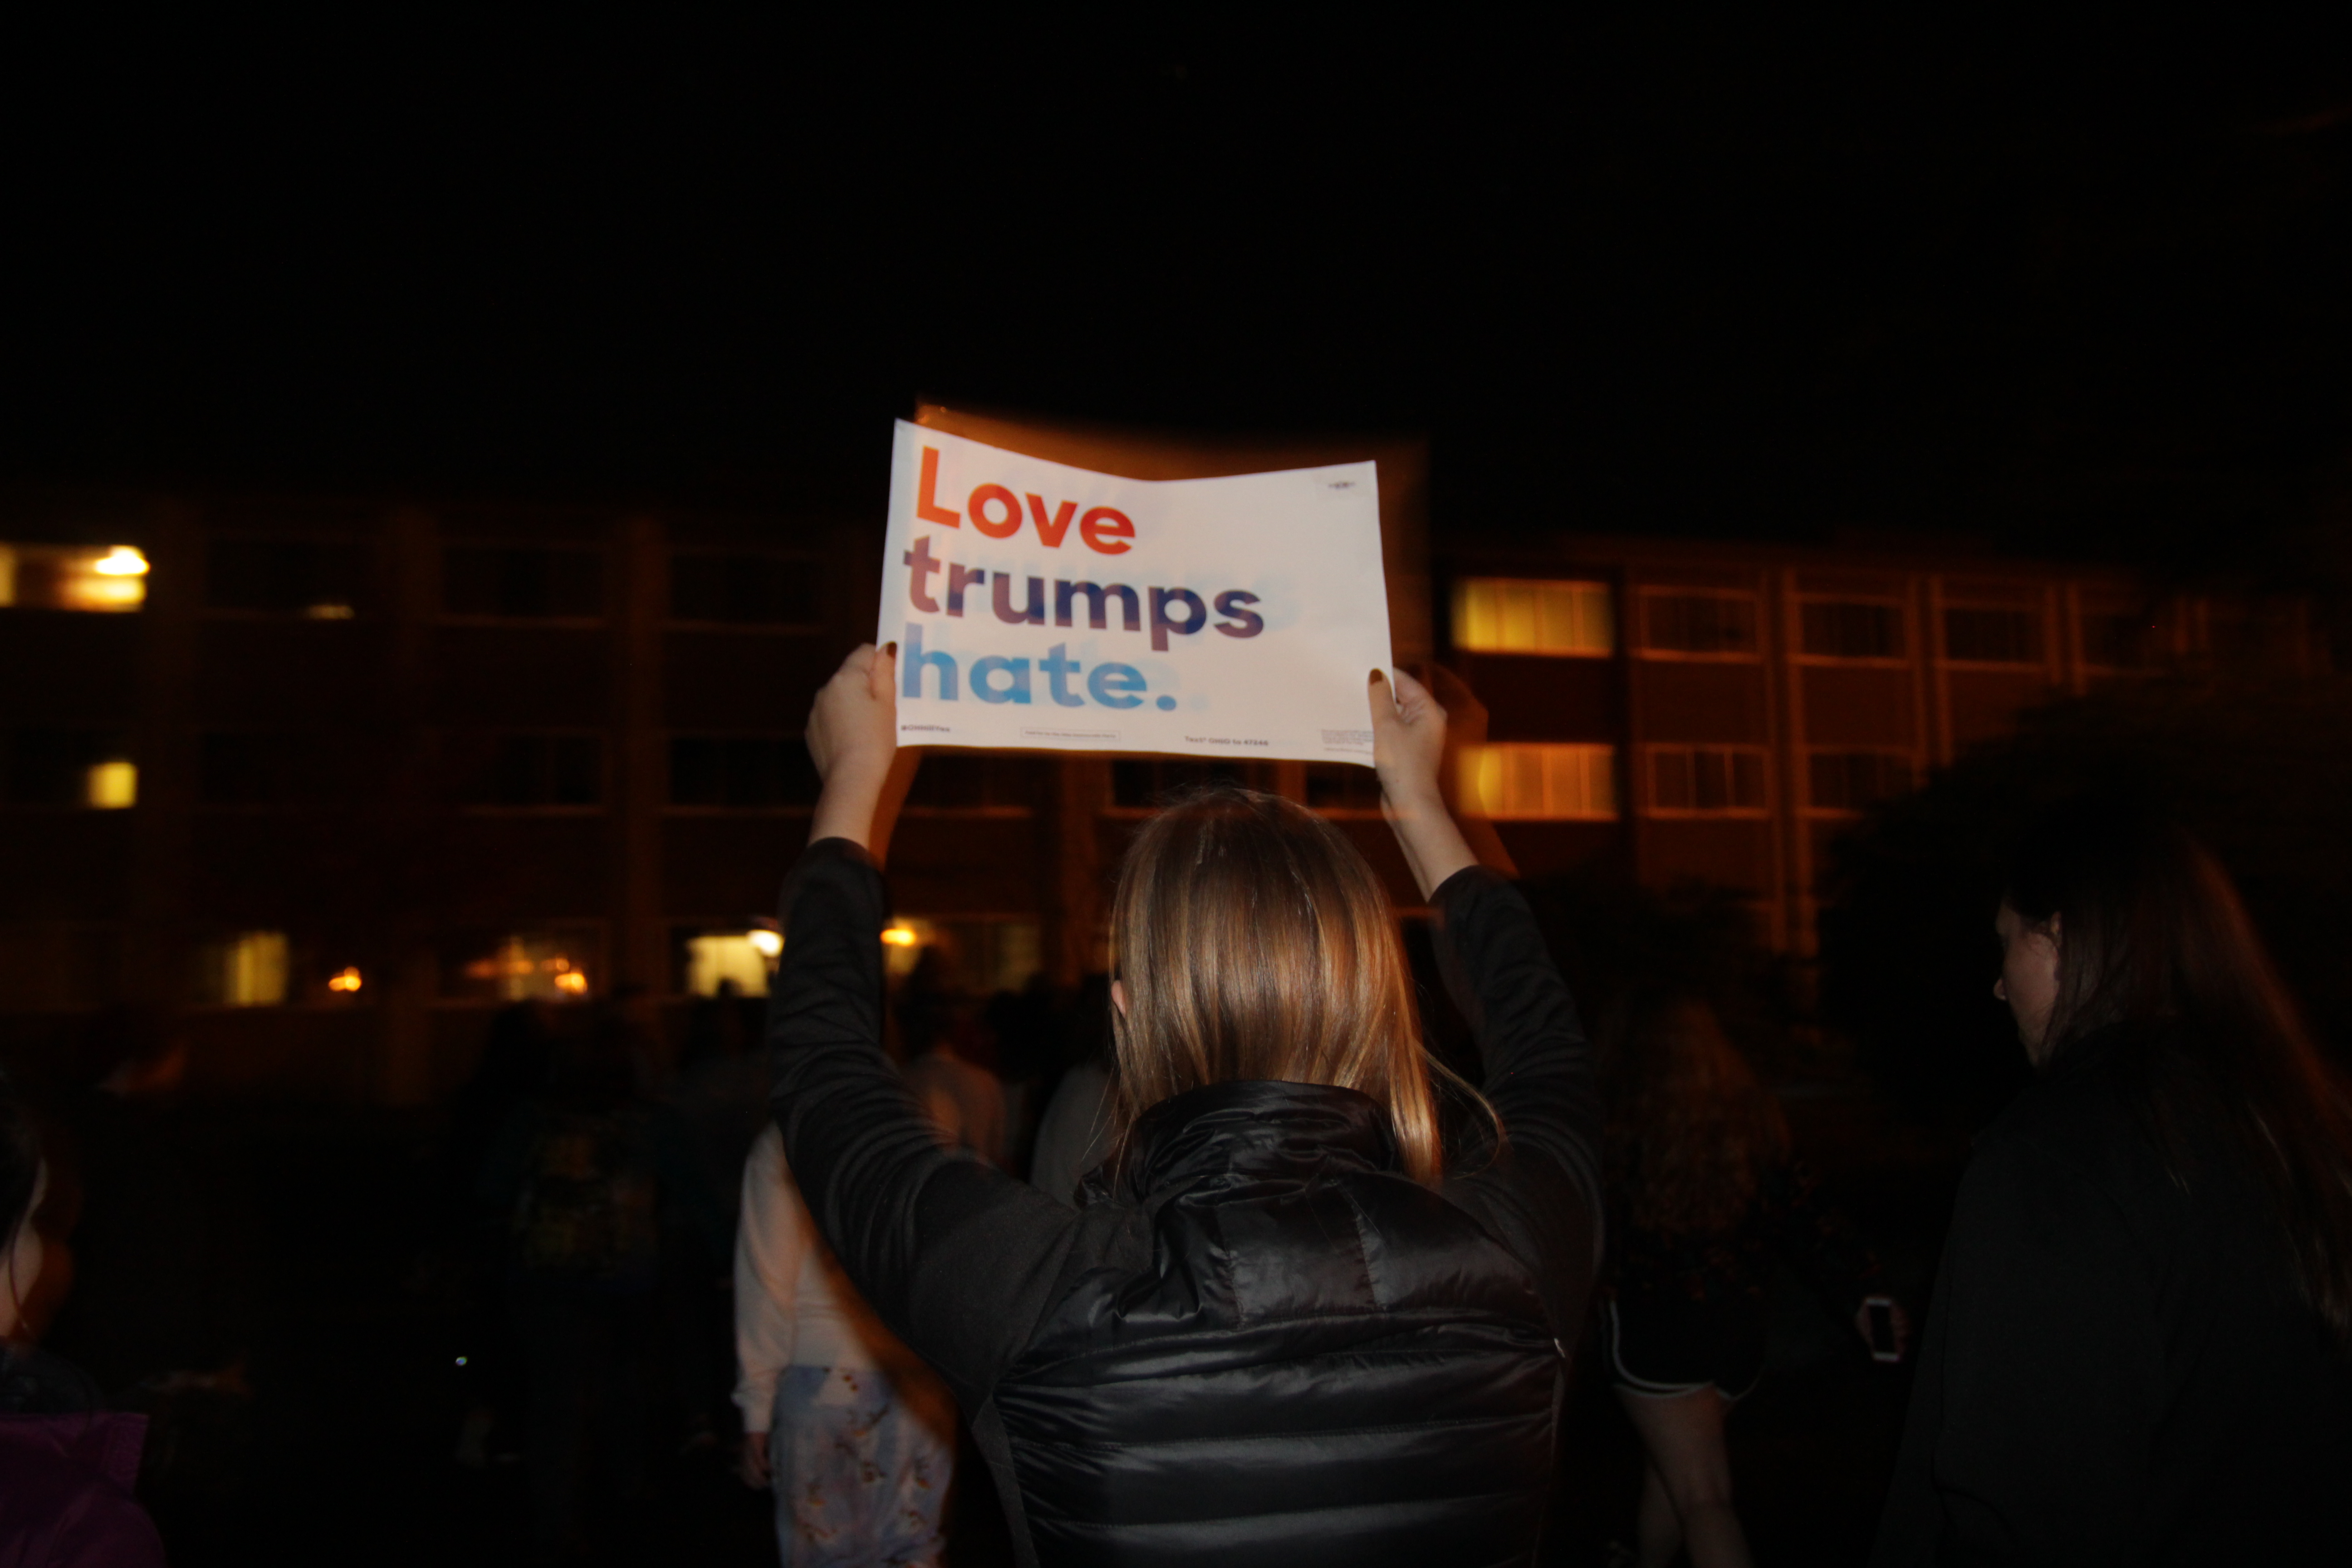 Photo by Oliver Johnson Protester carries "Love trumps hate" sign.